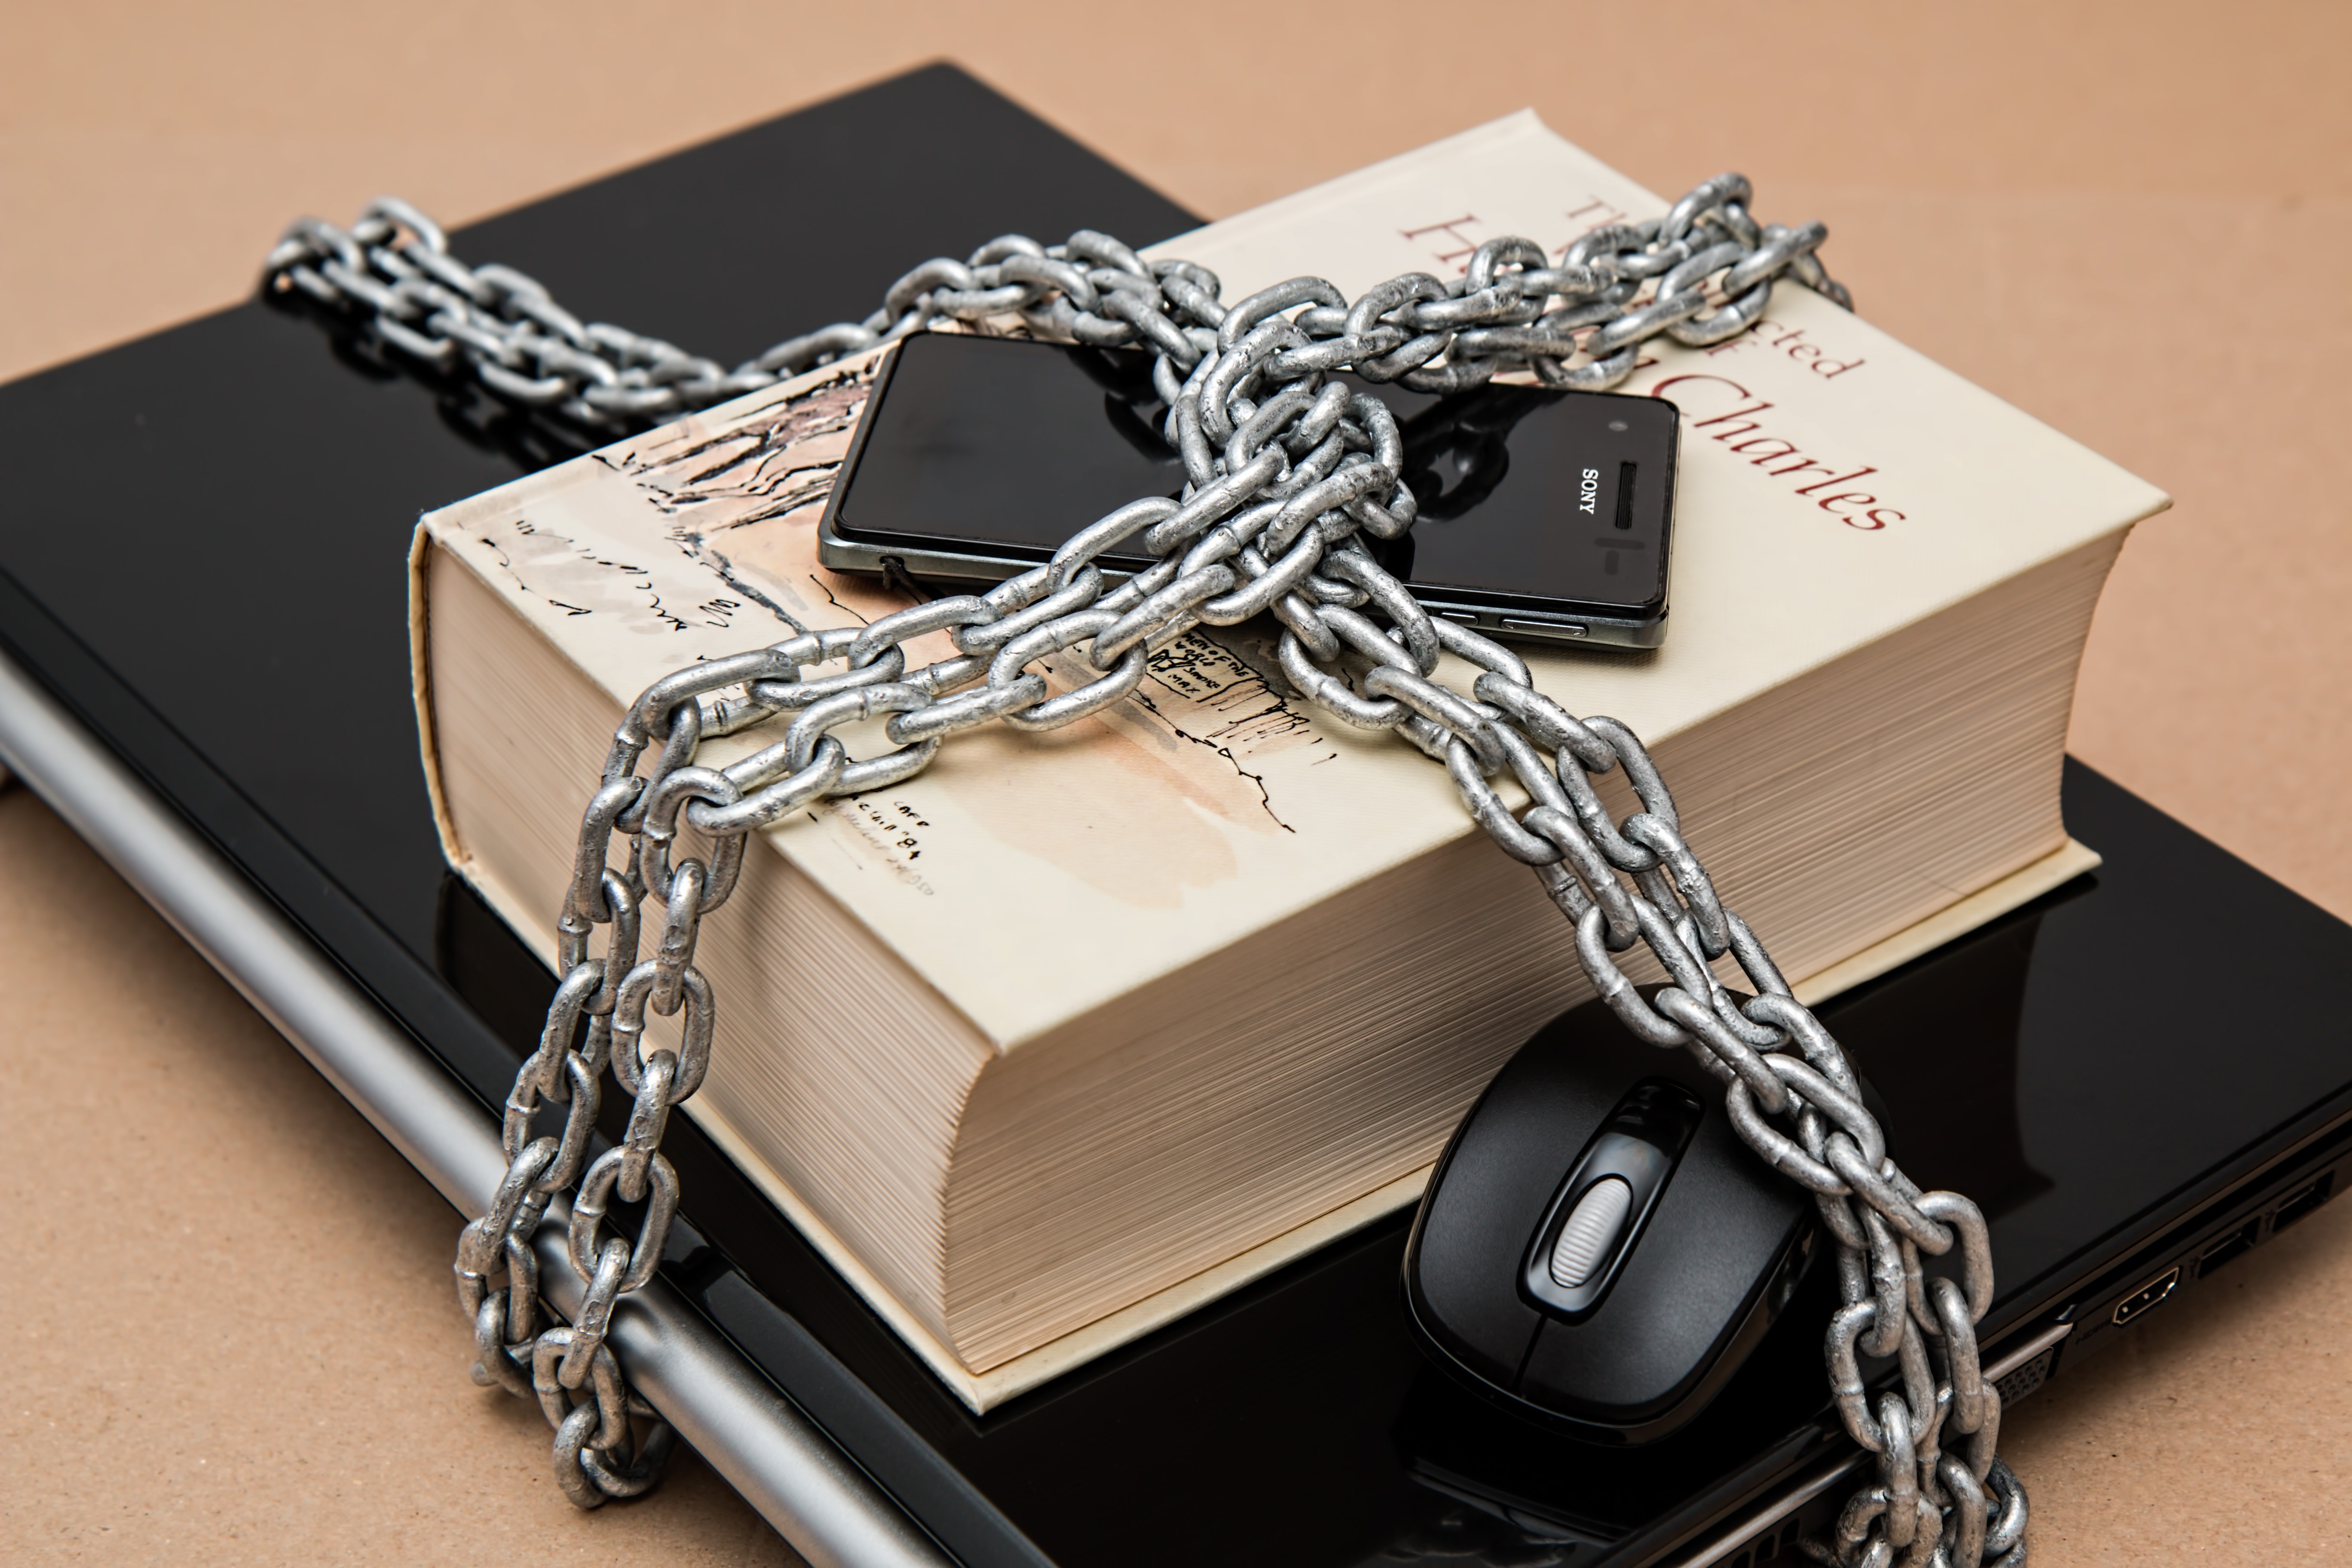 A book titled 'The End of Privacy' and electronic devices including a smartphone and a laptop wrapped in heavy metal chains, symbolizing the protection of personal privacy and the concept of 'Our privacy is not for sale'.